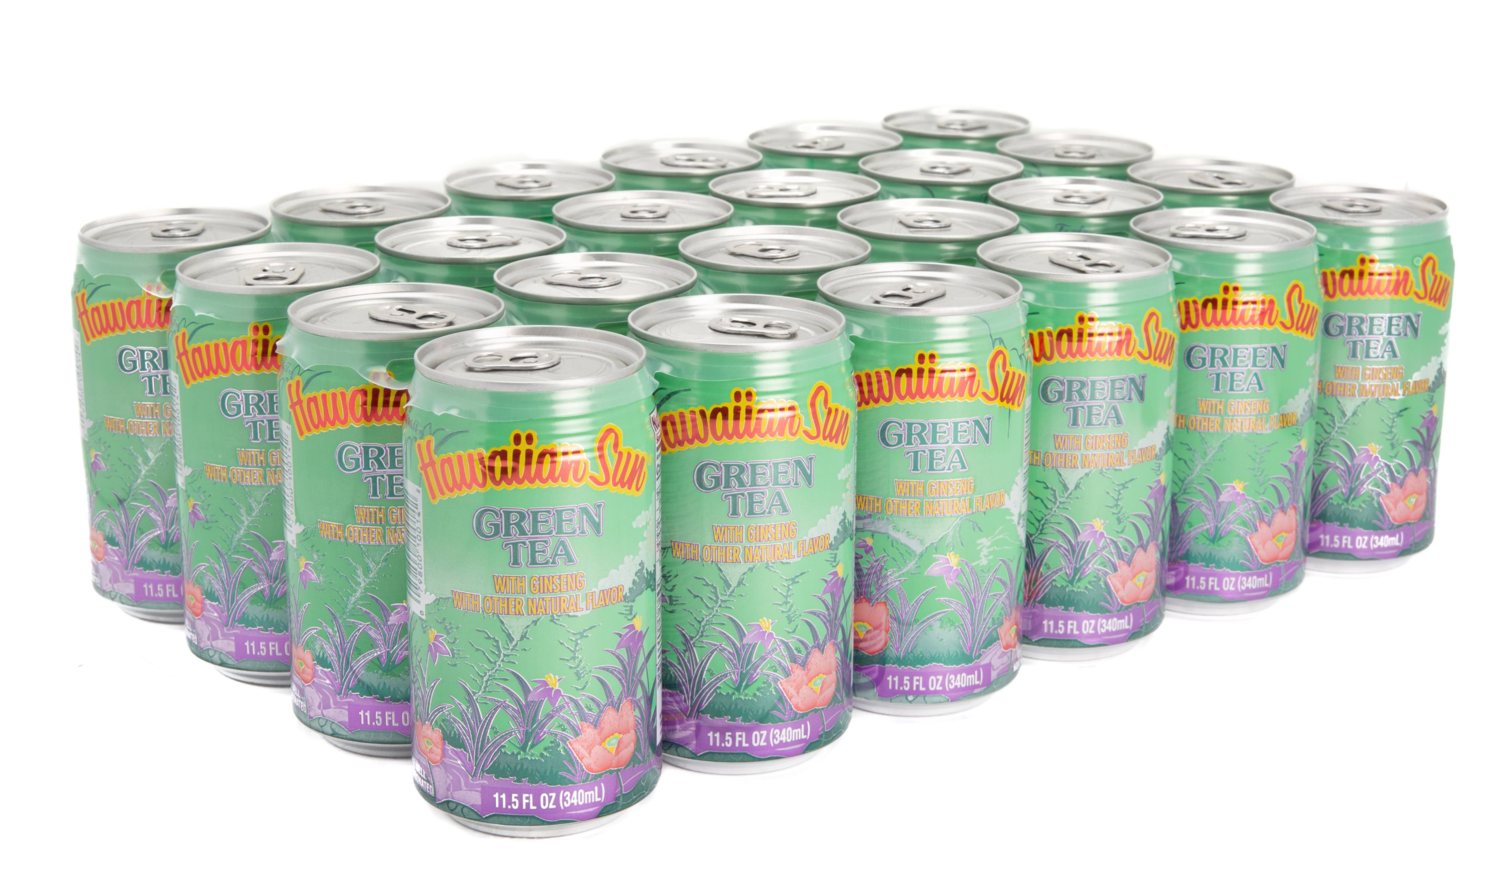 Hawaiian Sun Drink - Green Tea With Ginseng 11.5 oz (Pack of 24) **Limit 2 cases total per purchase transaction**